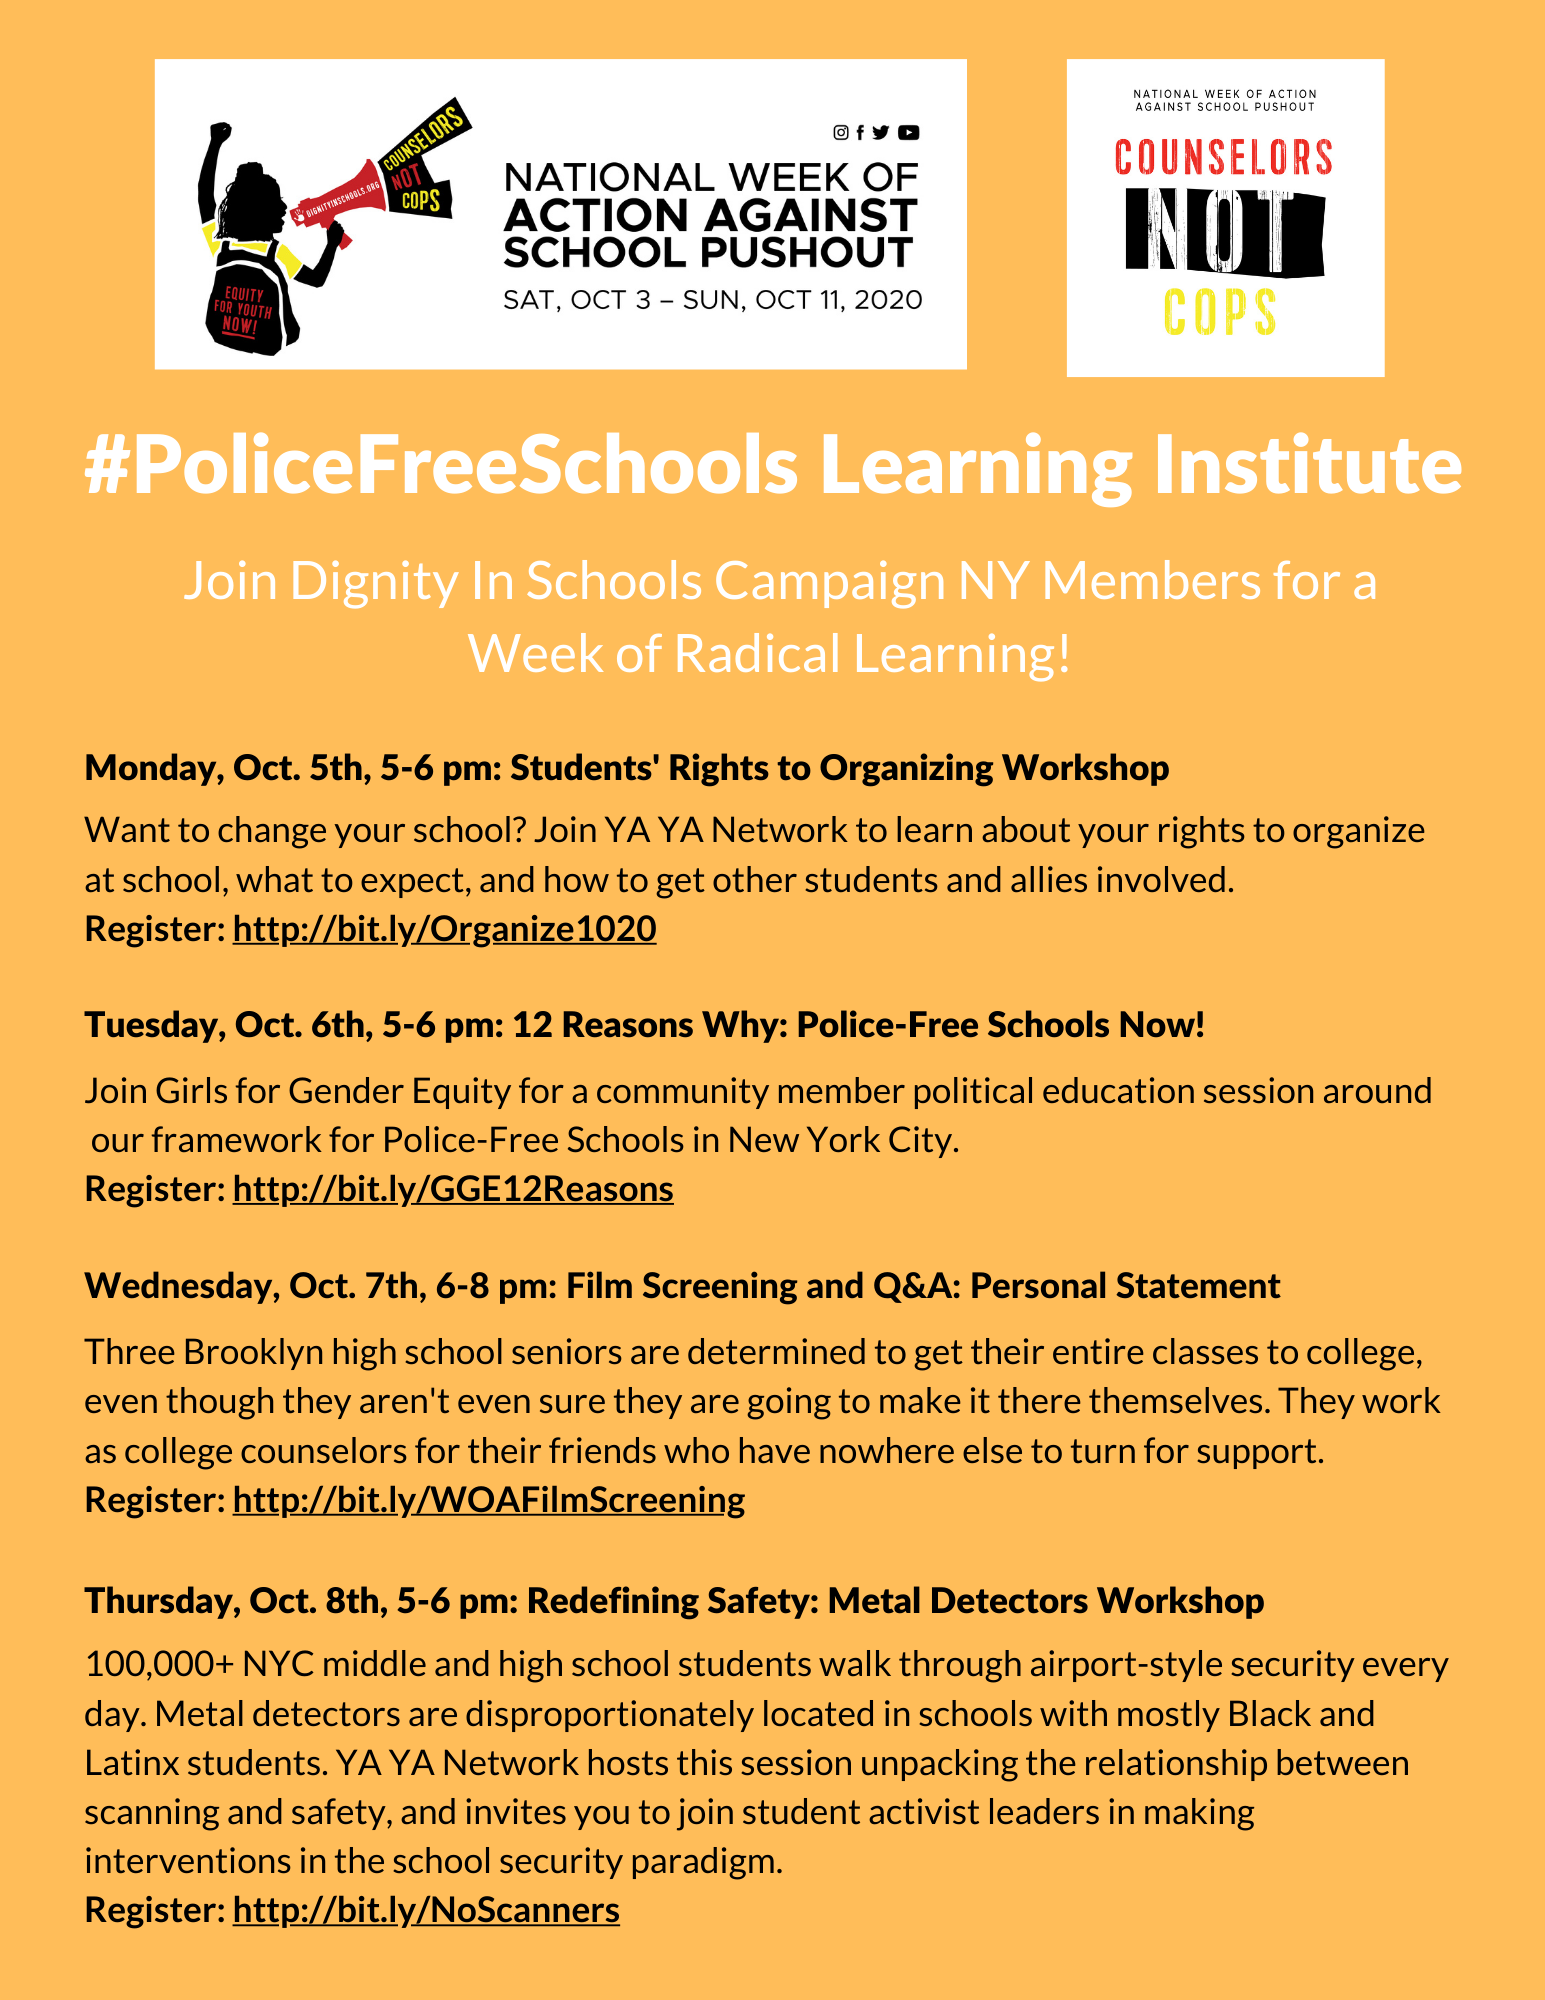 Join Dignity in Schools Campaign's #PoliceFreeSchools Online Learning Institute